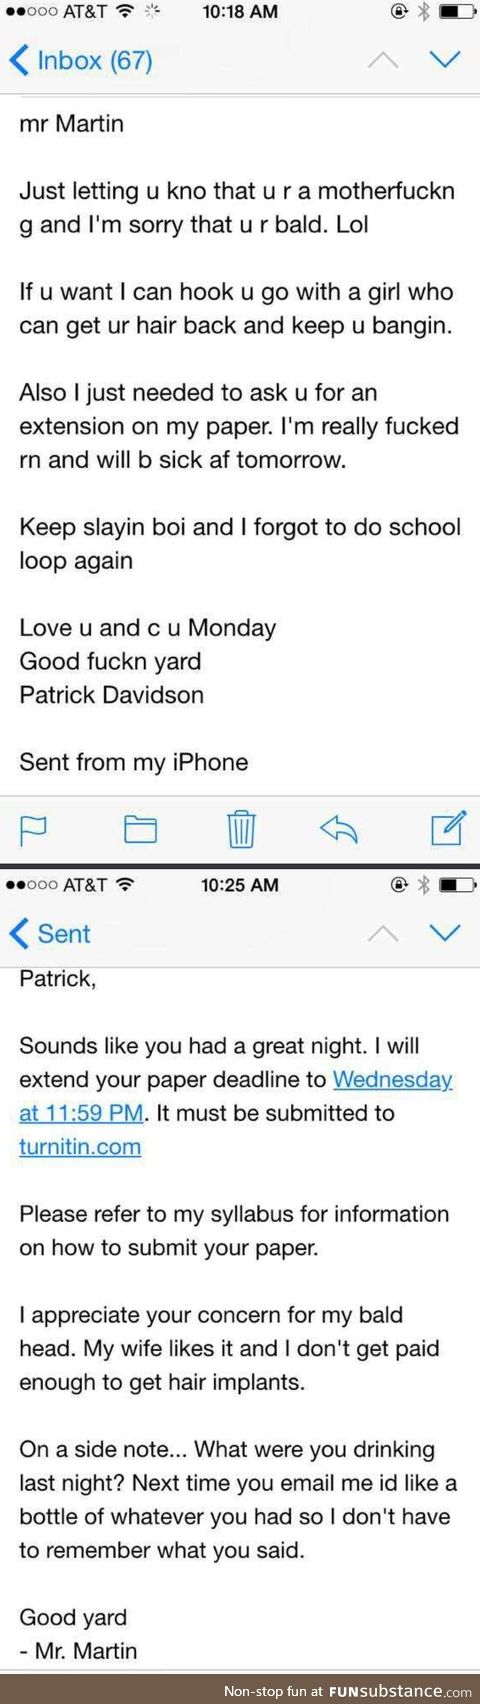 Drunk students convo with a professor